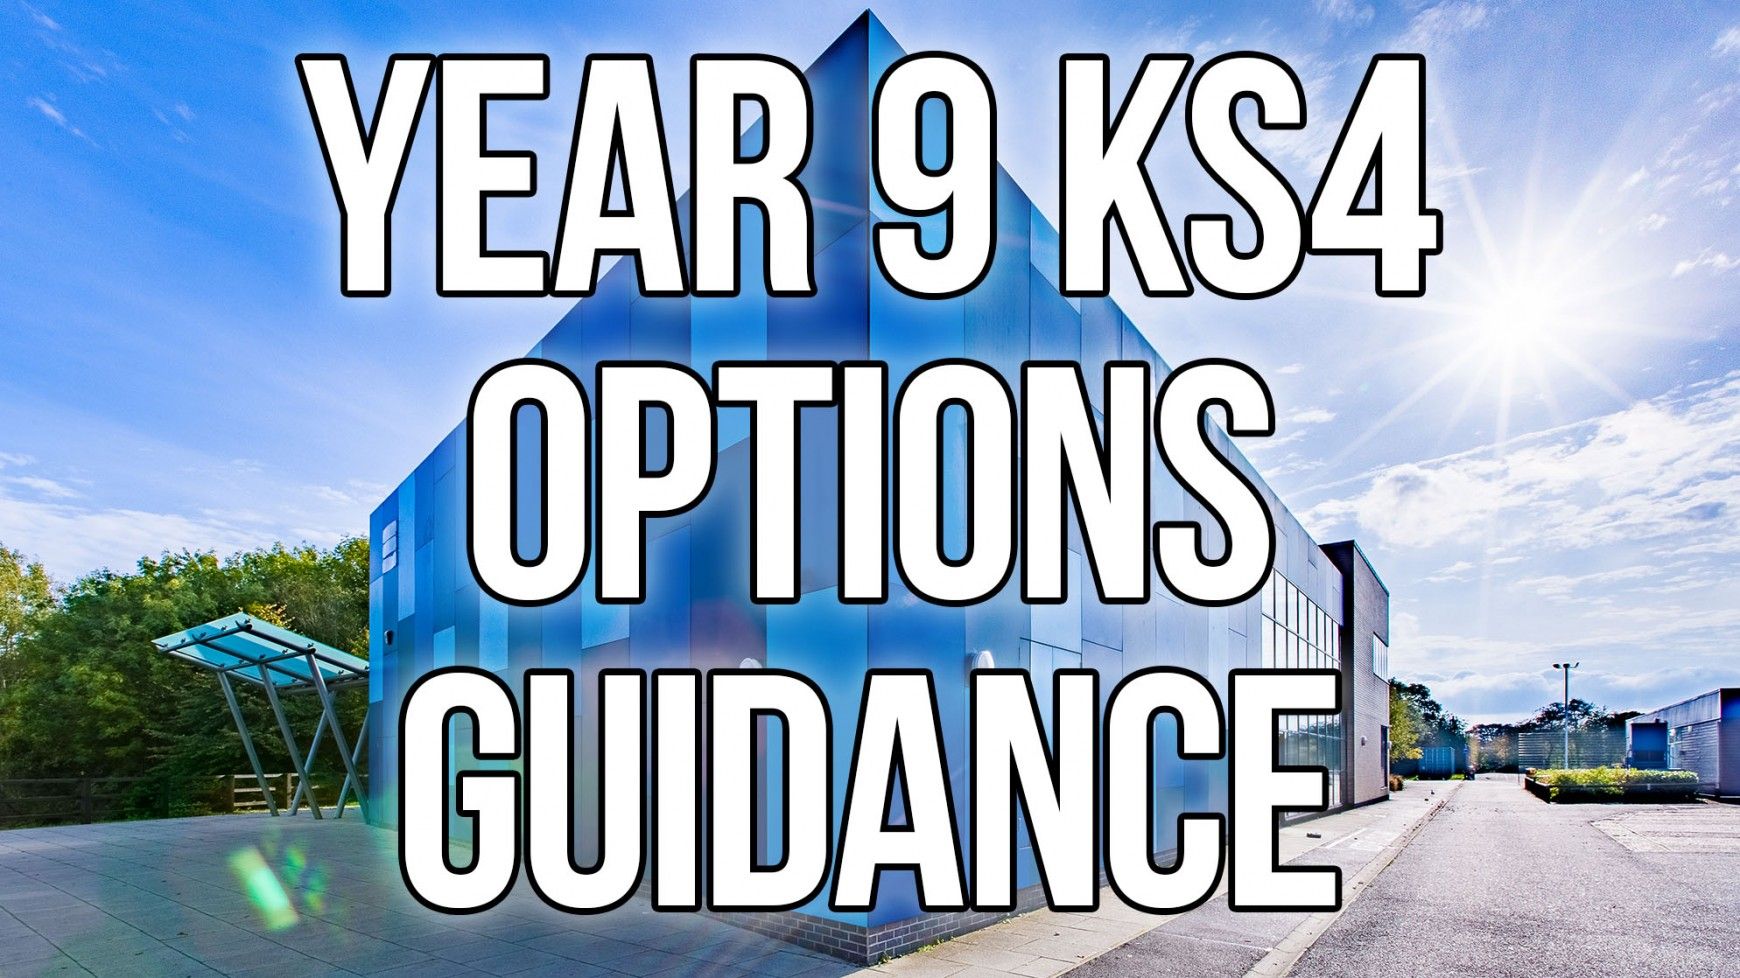 Year 9 KS4 Courses (Options) Guidance